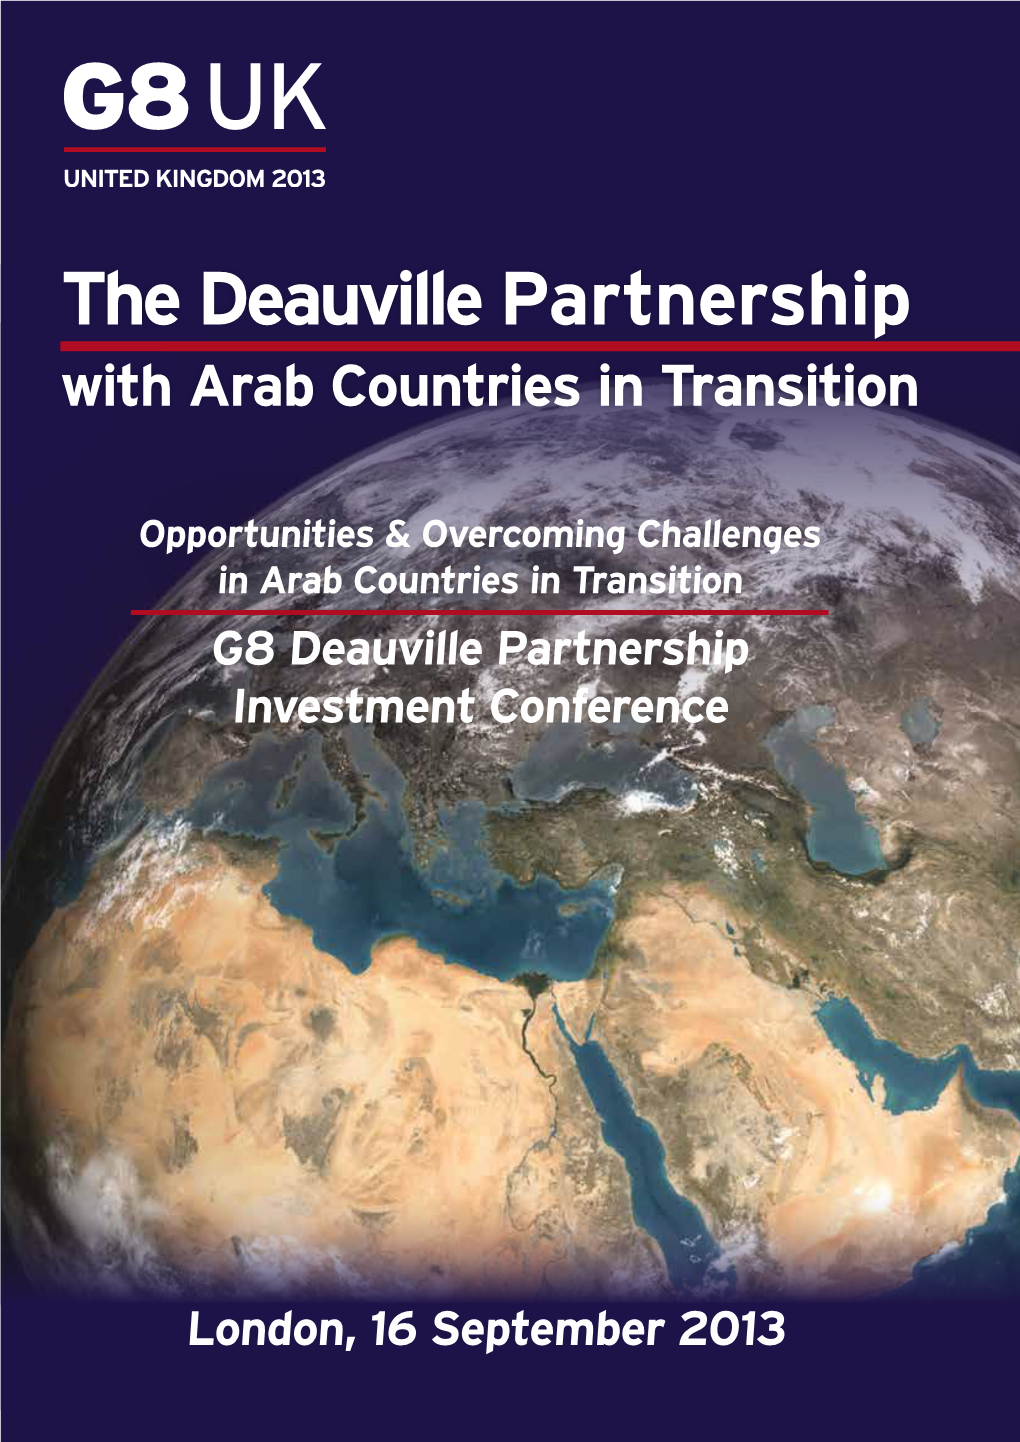 The Deauville Partnership with Arab Countries in Transition